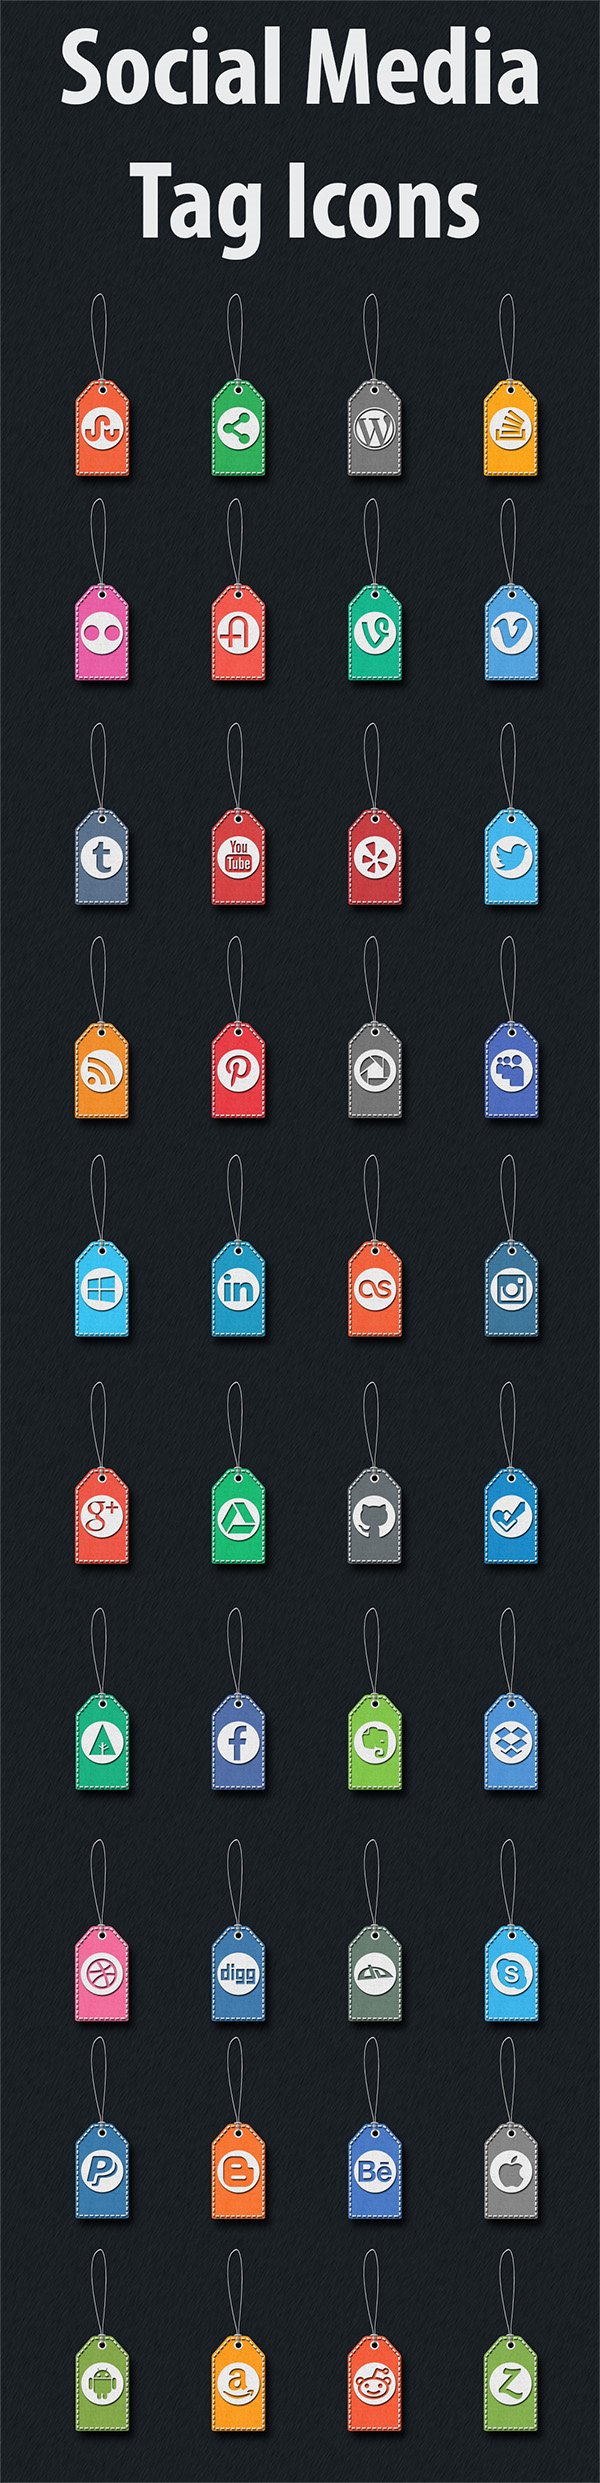 40 Stitched Social Media Tag Icons